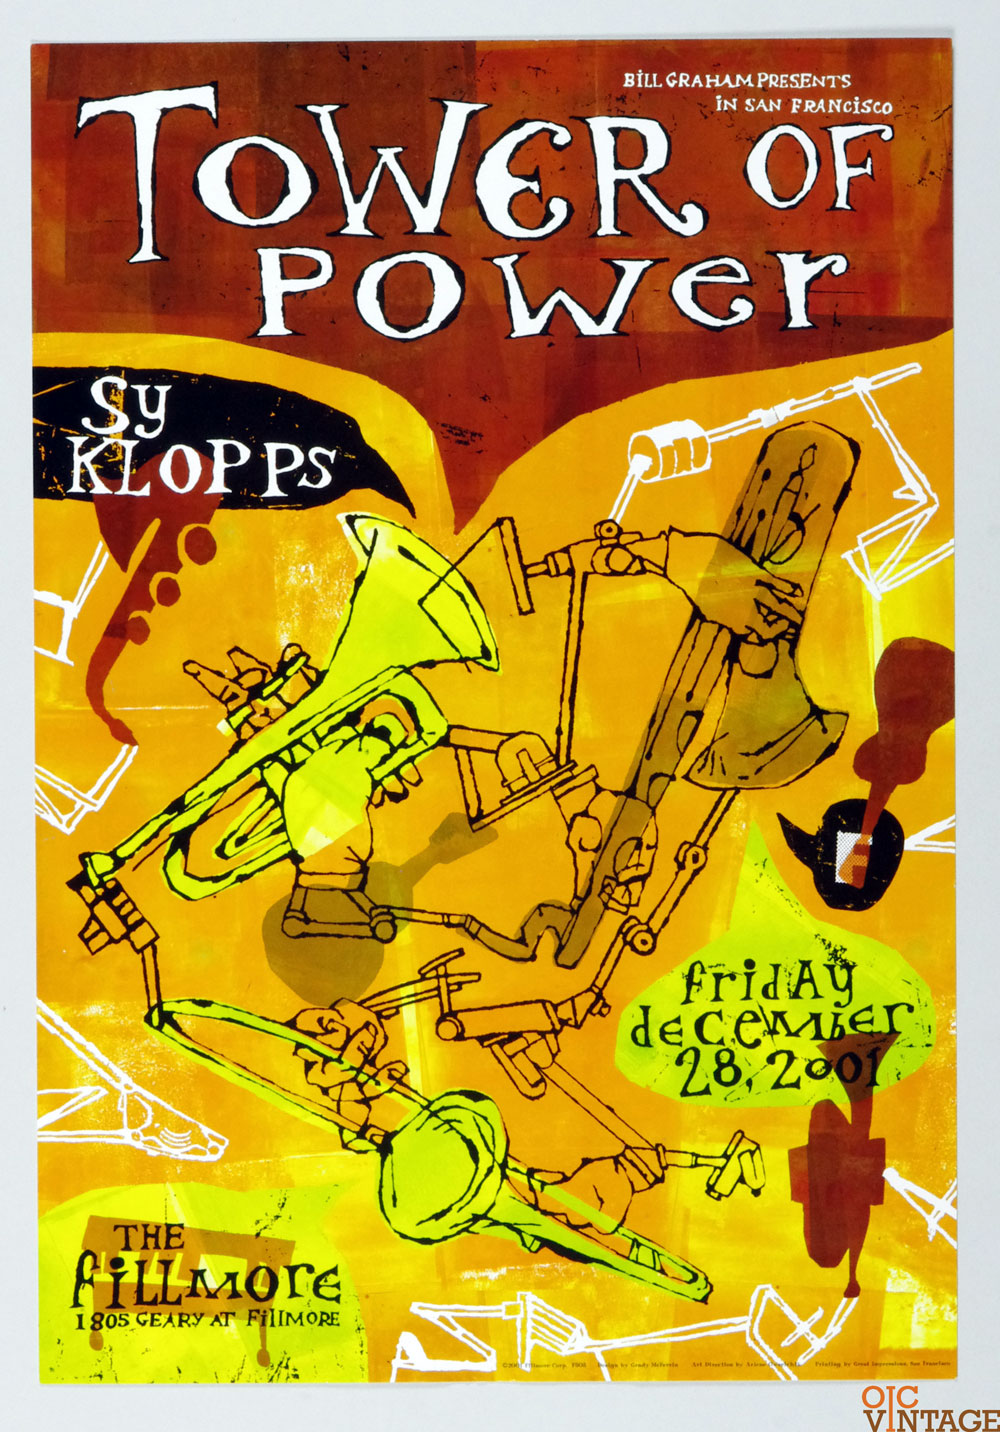 Tower of Power Poster 2001 Dec 28 New Fillmore San Francisco